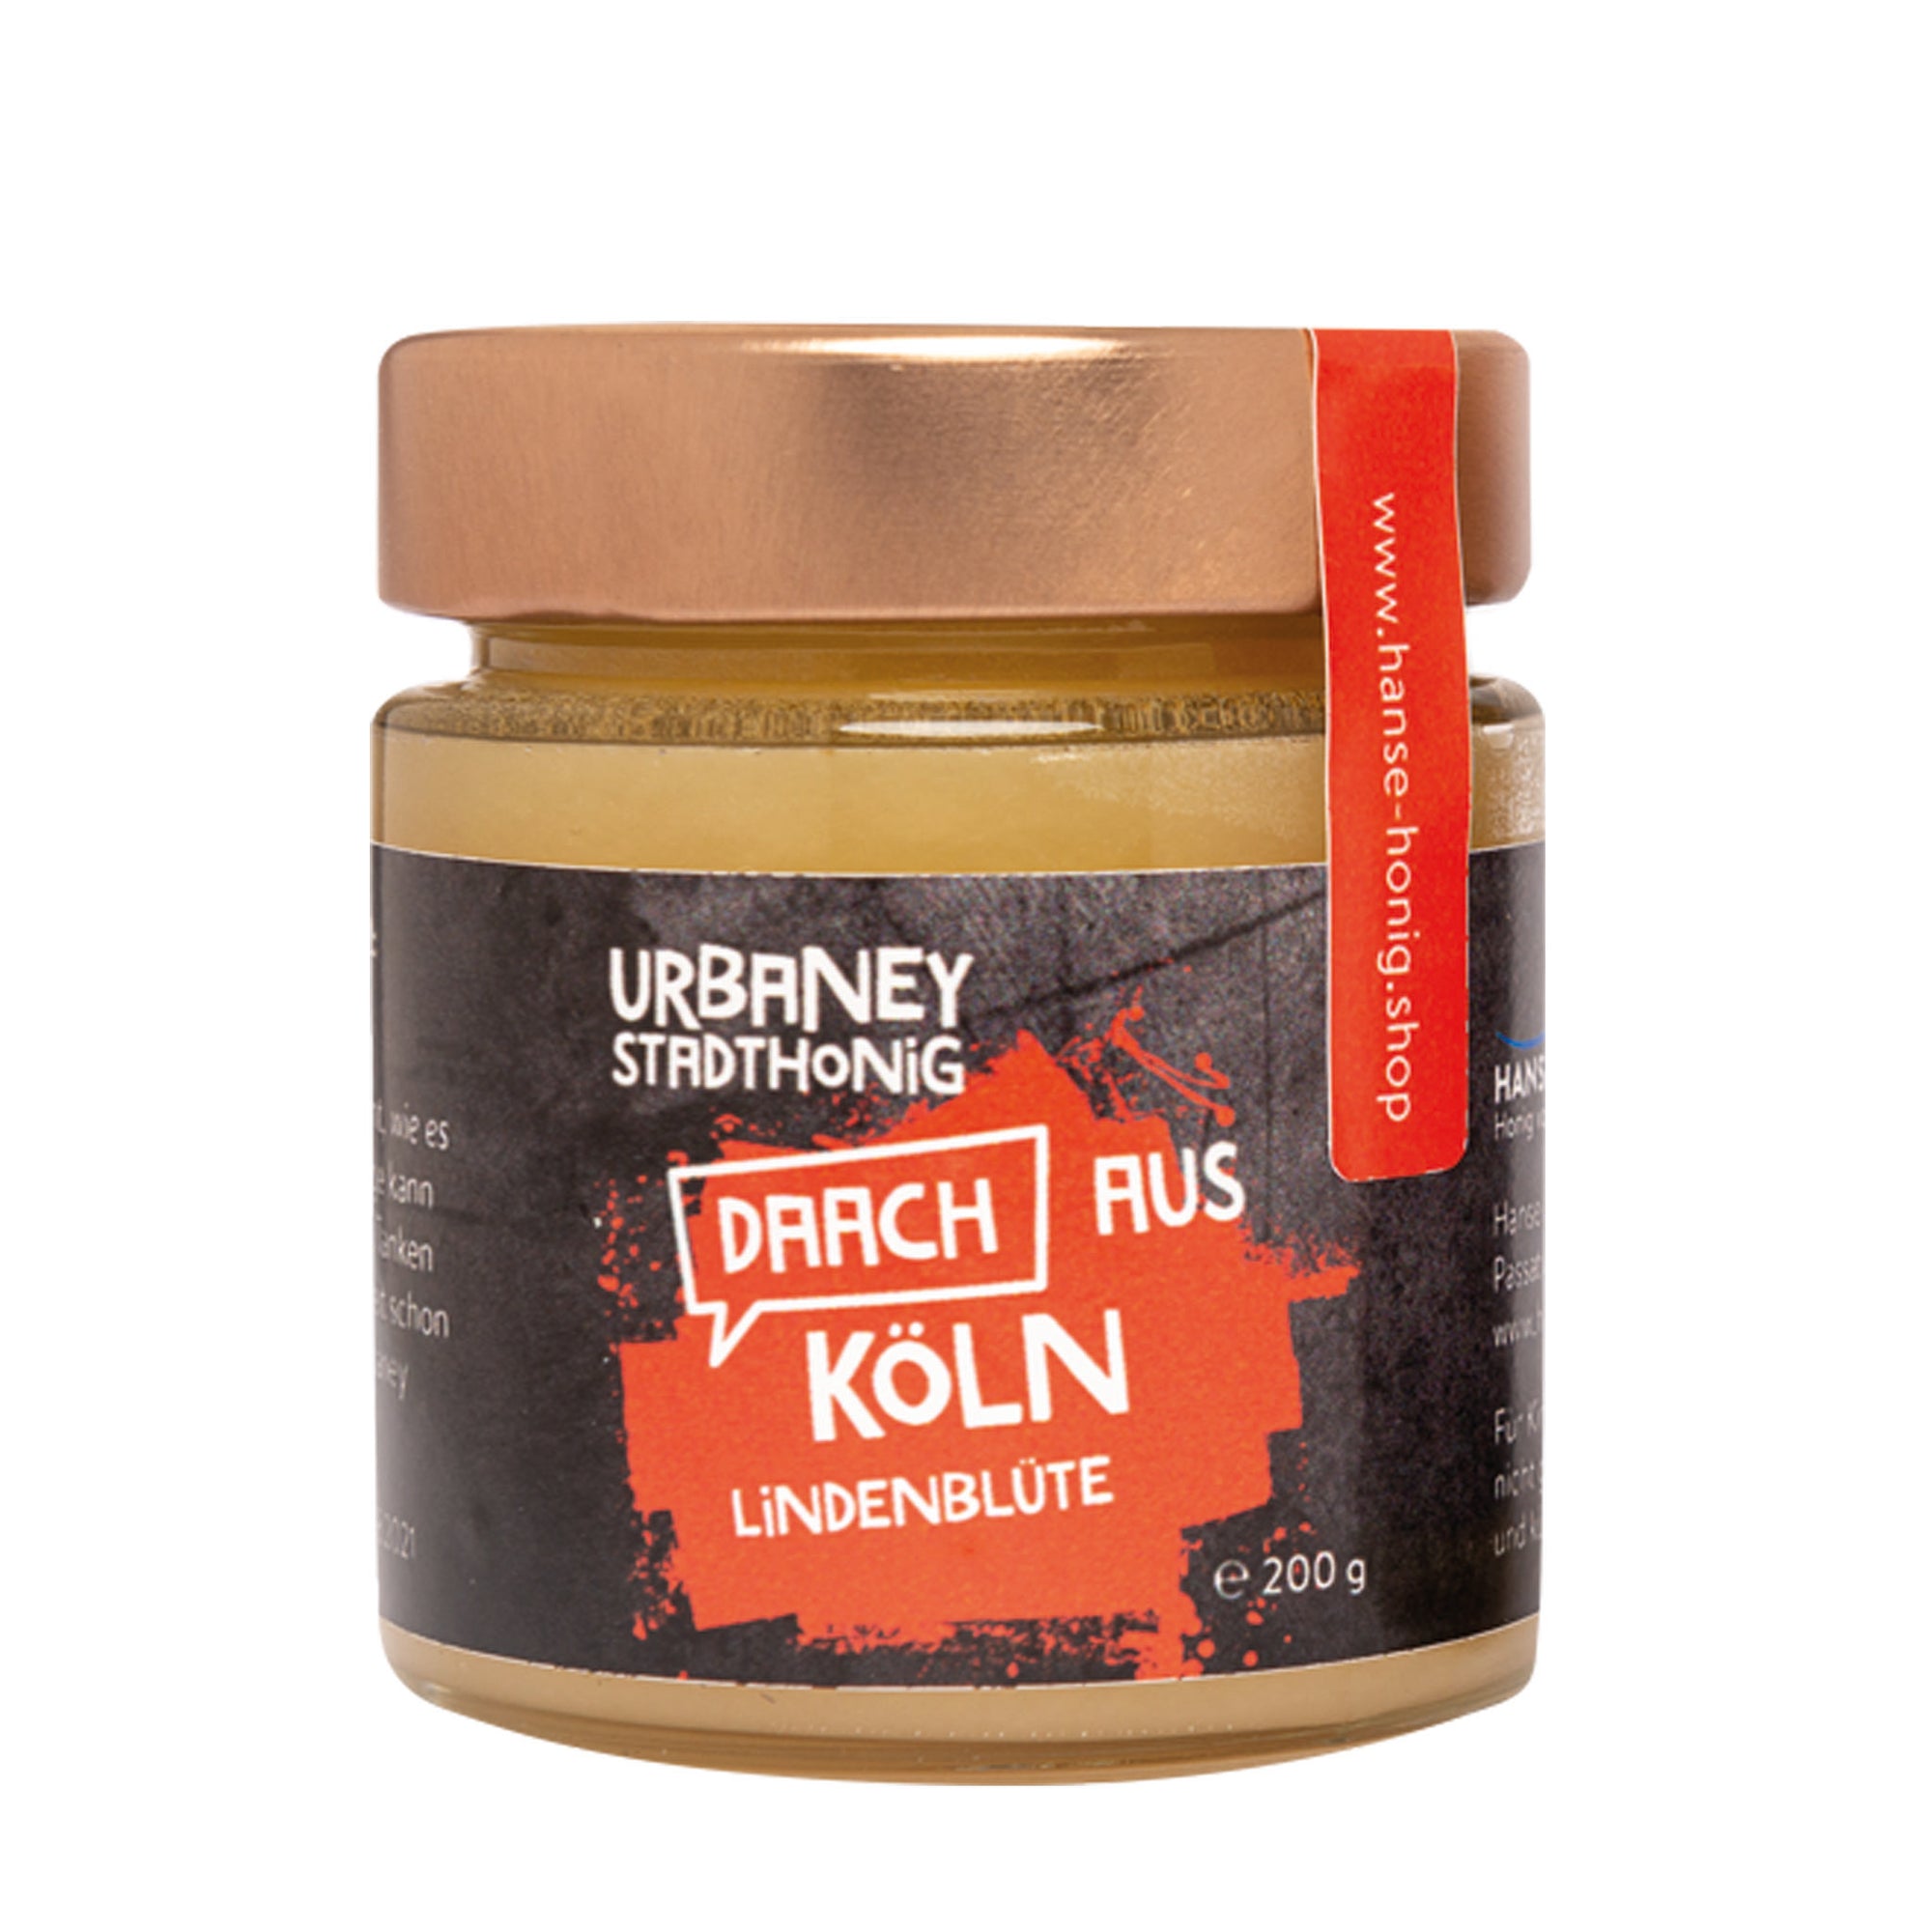 Linden blossom honey from Cologne